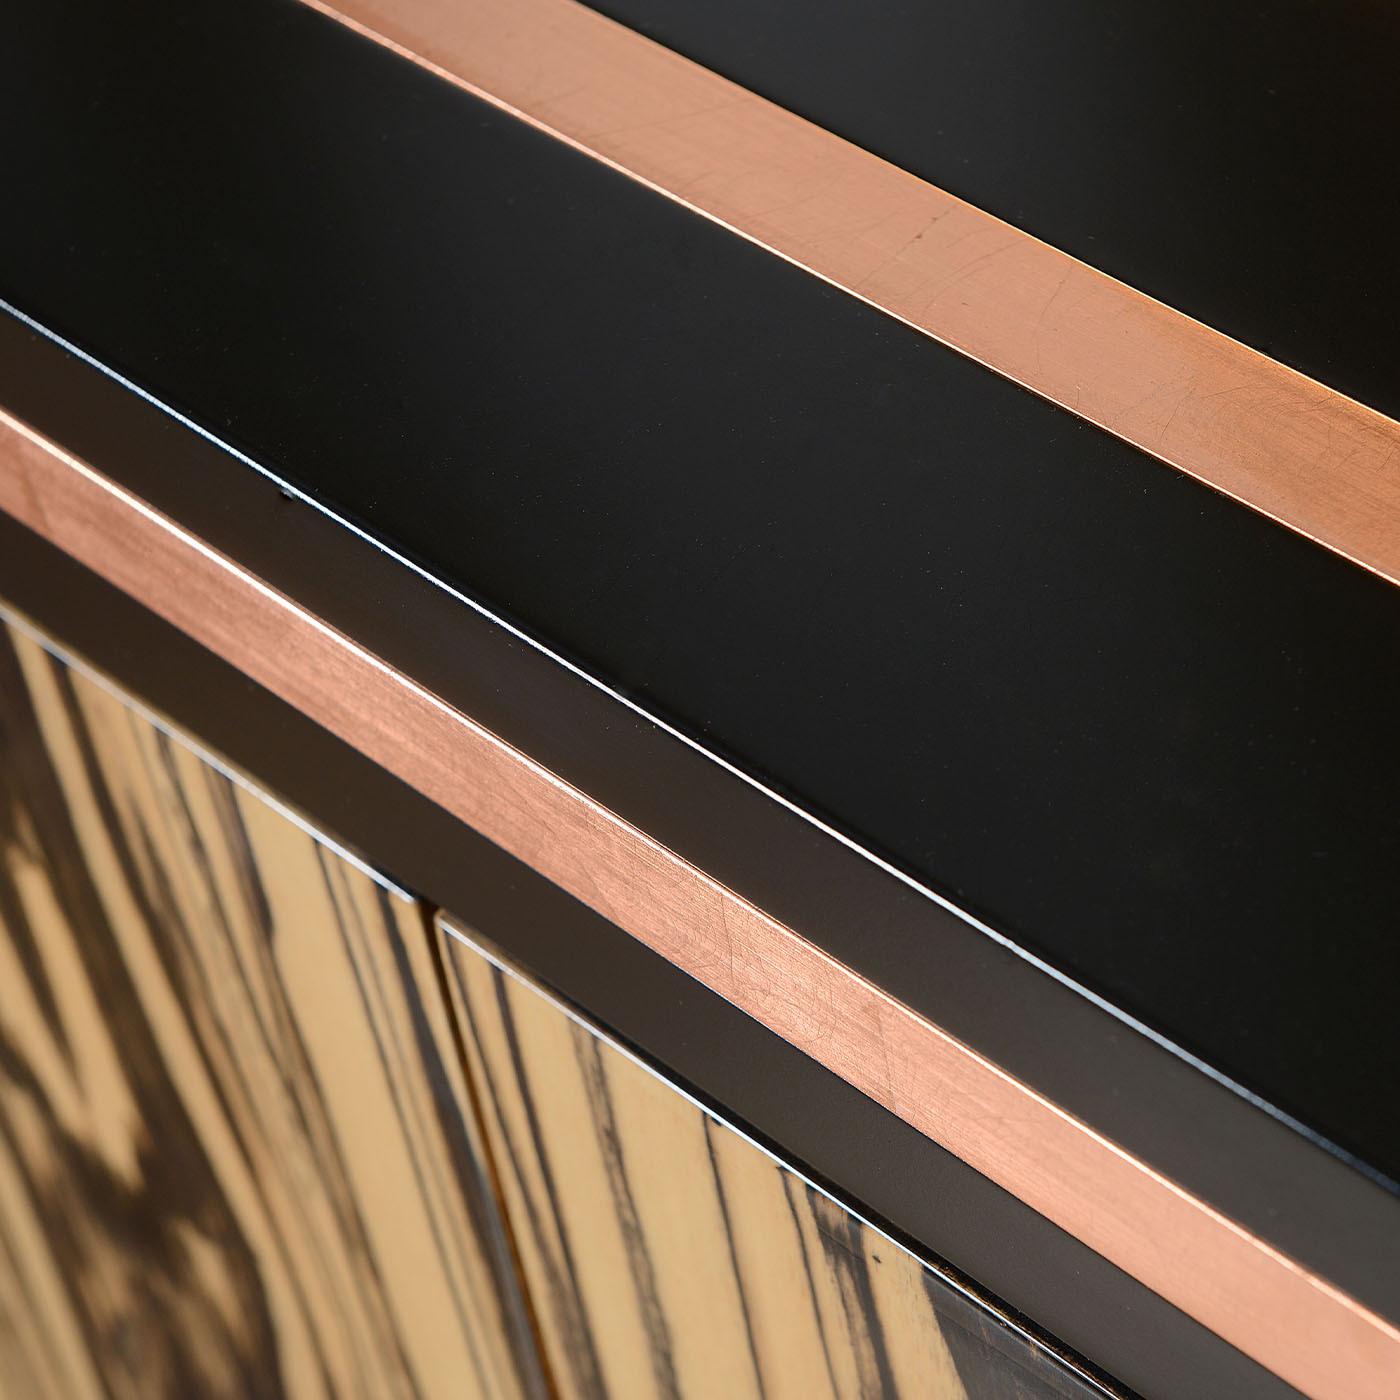 An authentic cabinetmaking gem, this sideboard brims with timeless opulence thanks to its precious white ebony doors in a luminous glossy finish. Matte-black lacquer adds depth and elegance to the piece, which also flaunts glossy copper leaf inserts